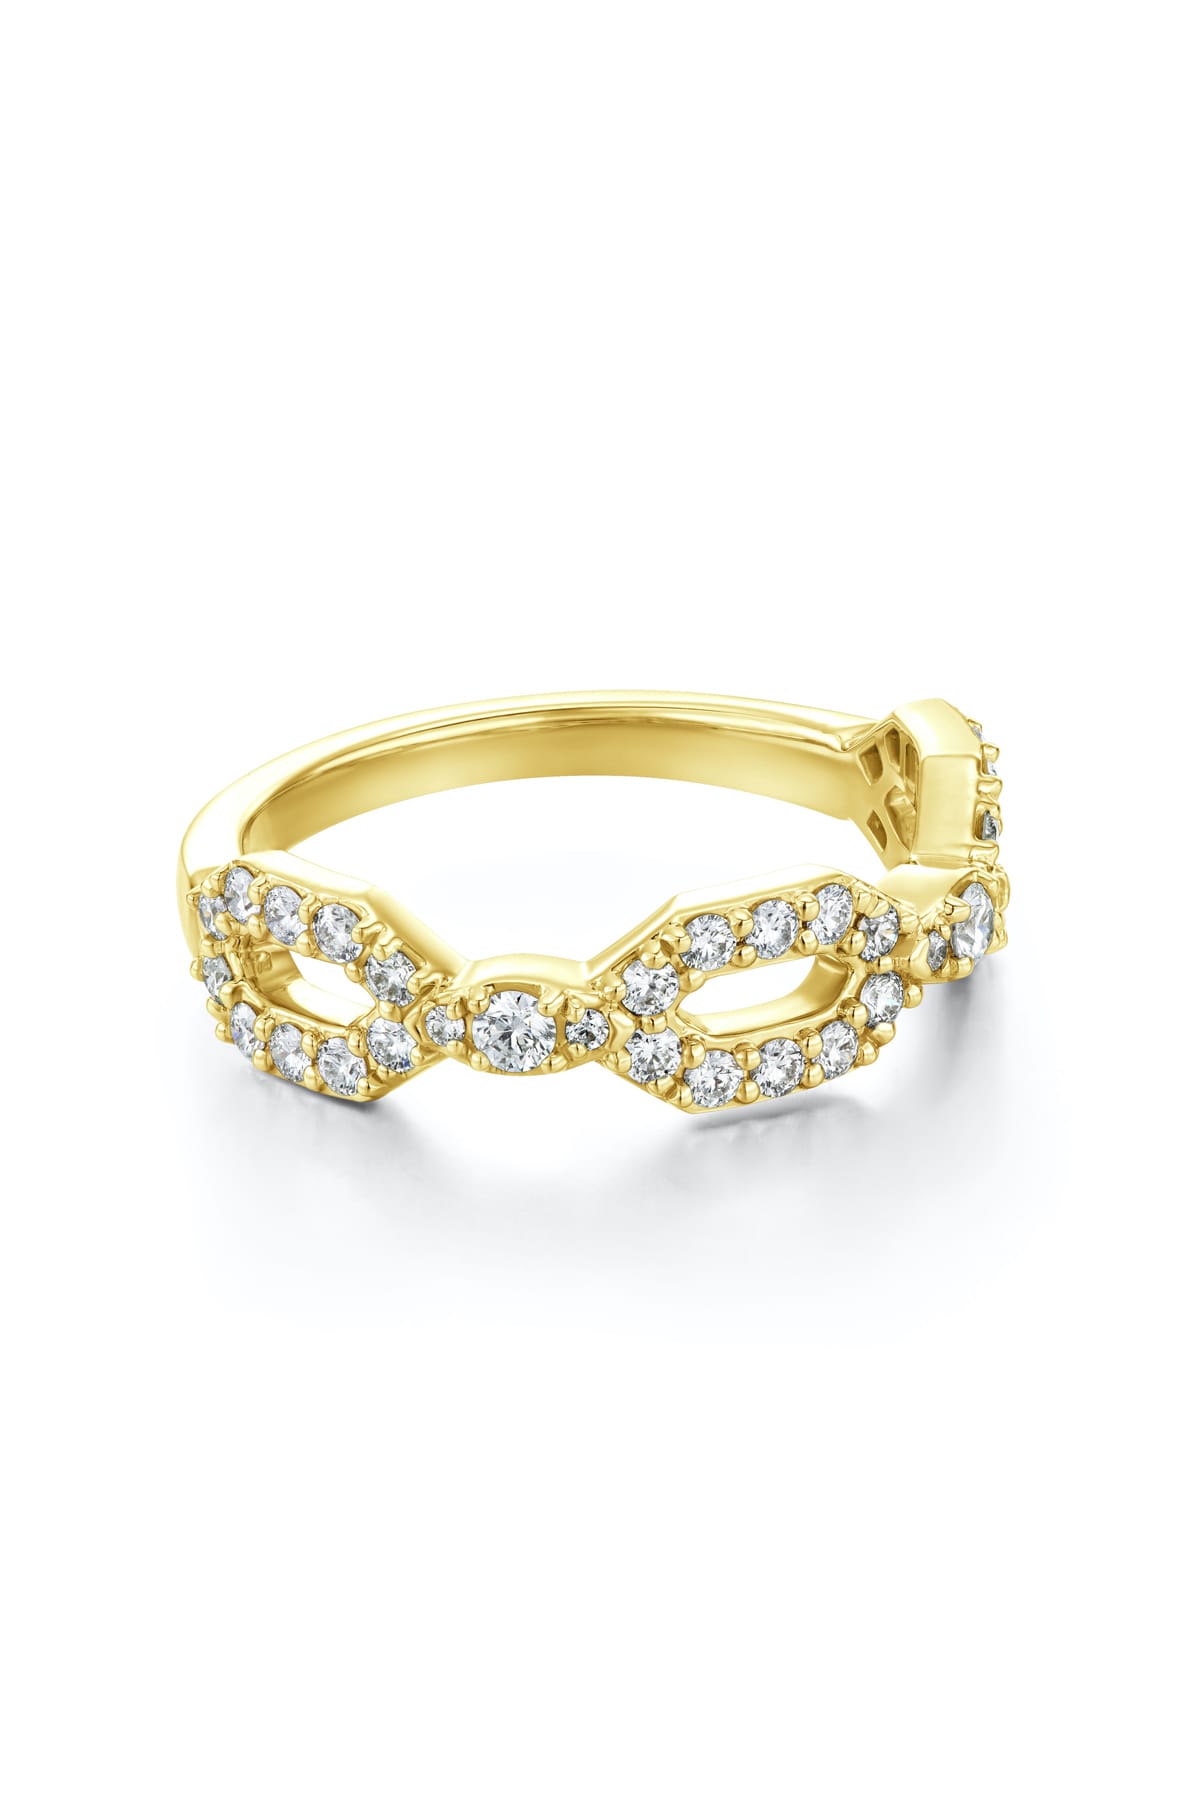 Open Regal Diamond Band From Hearts On Fire available at LeGassick Diamonds and Jewellery Gold Coast, Australia.